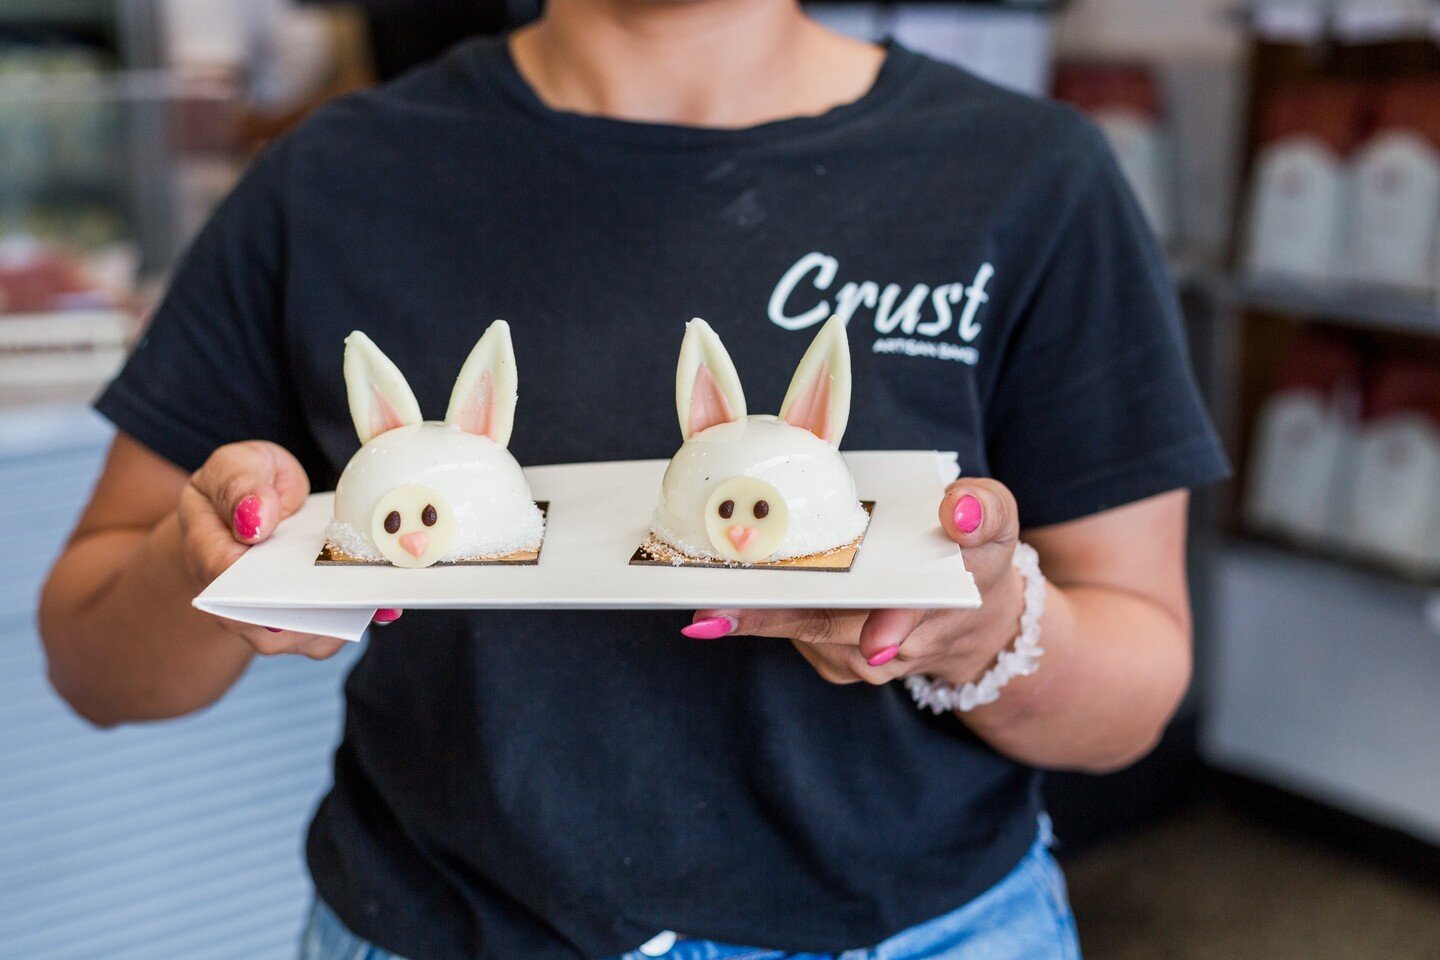 Every-Bunny loves the treats on offer at @crustbakeryfyshwick! 

Don't miss out on their limited edition white chocolate molten bunny (available until 31 March). Indulge in layers of white yogurt mousse, butterscotch pecan filling, and fluffy carrot 